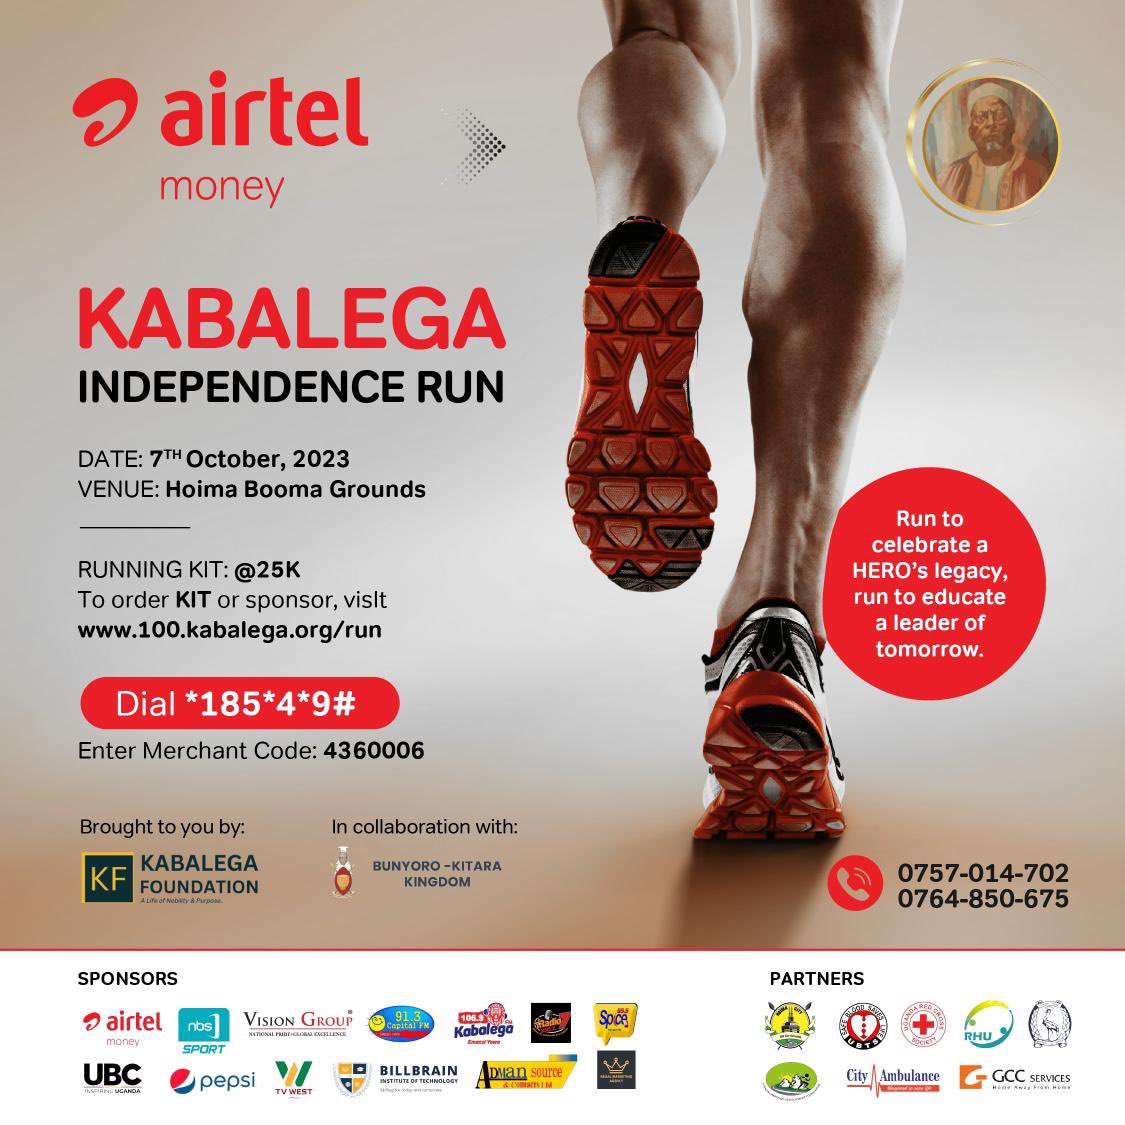 We are launched, up and running. Get your calendar marked off to a weekend in Hoima as we run to celebrate the life of a hero and pool to the Kabalega Education Fund.
#KabalegaIndependenceRun
#100YearsOfKabalega